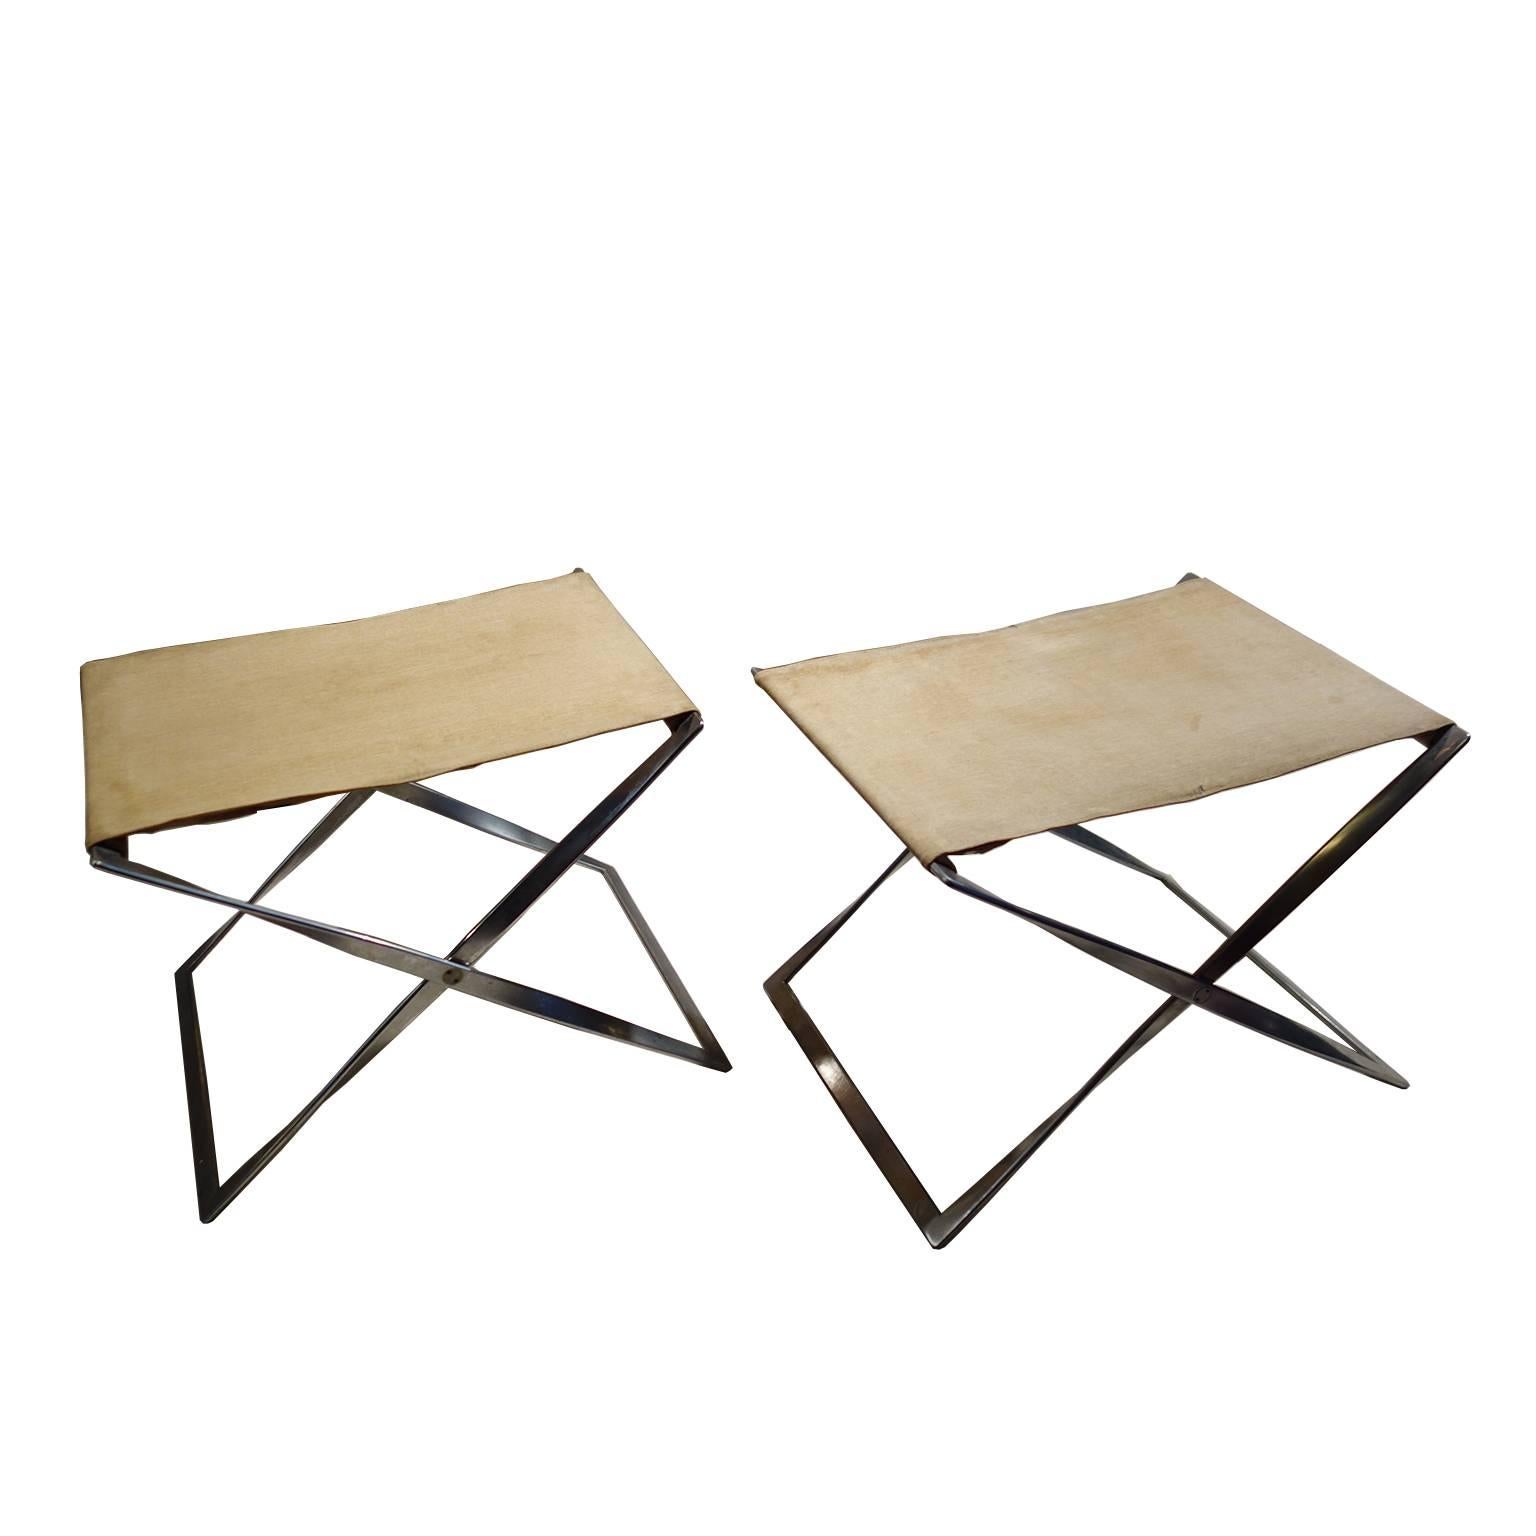 Beautiful pair of foldable stools, model PK91, designed by Poul Kjaerholm.

Steel structure with original canvas seats from 1961.
The seats could be upholstered with new canvas if requested.